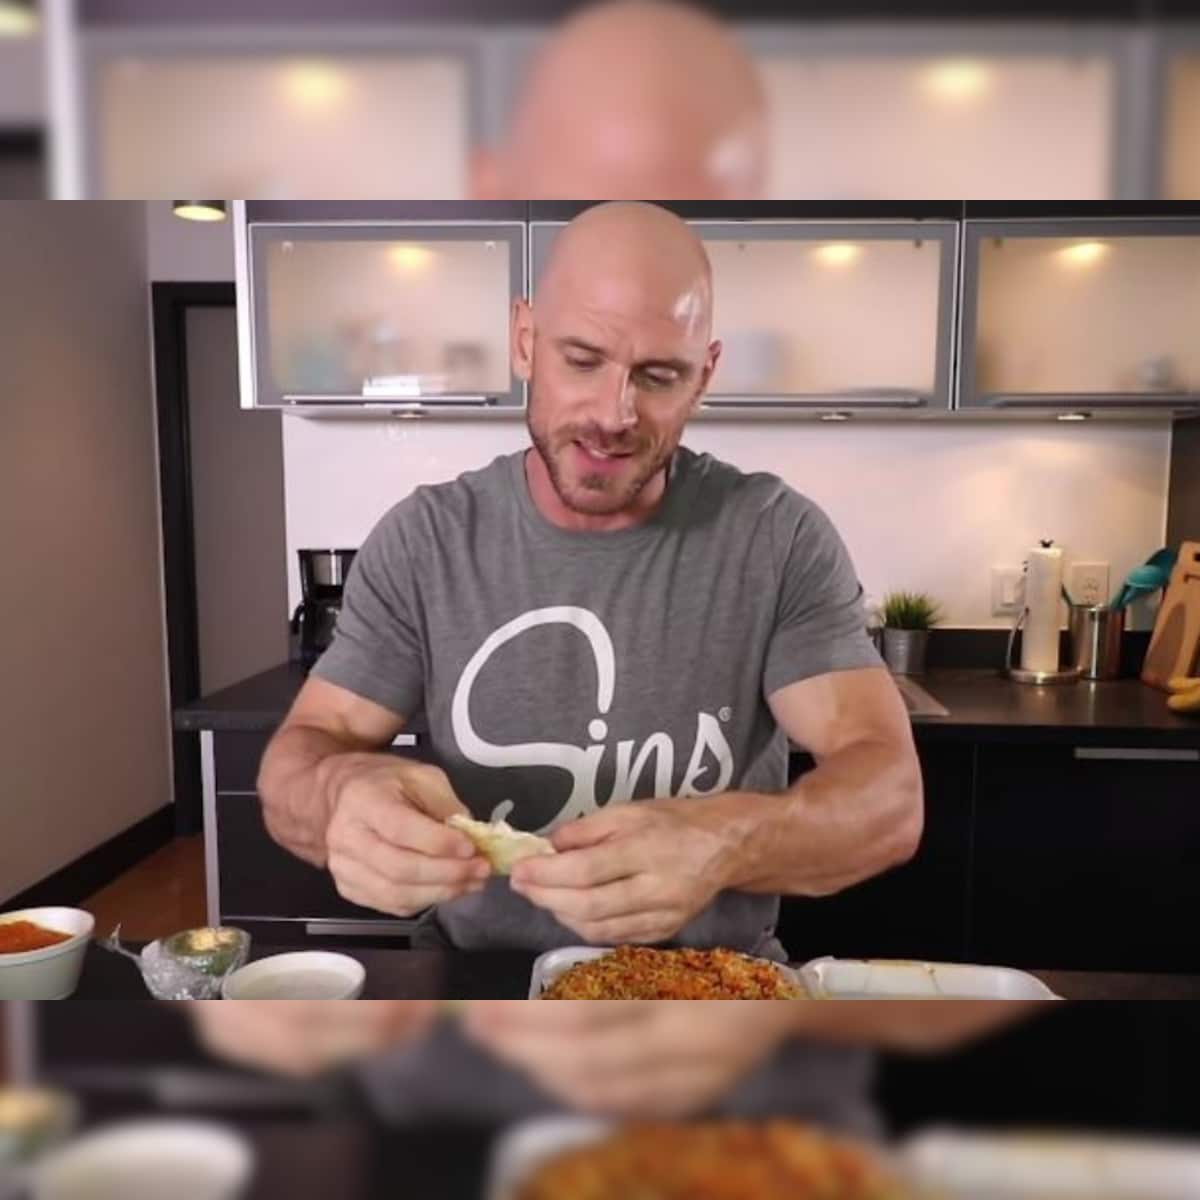 Johnny Sins School Master Johnny Girl - Adult Actor Johnny Sins Just Tried Biryani With Naan and the Internet is  Done For the Day